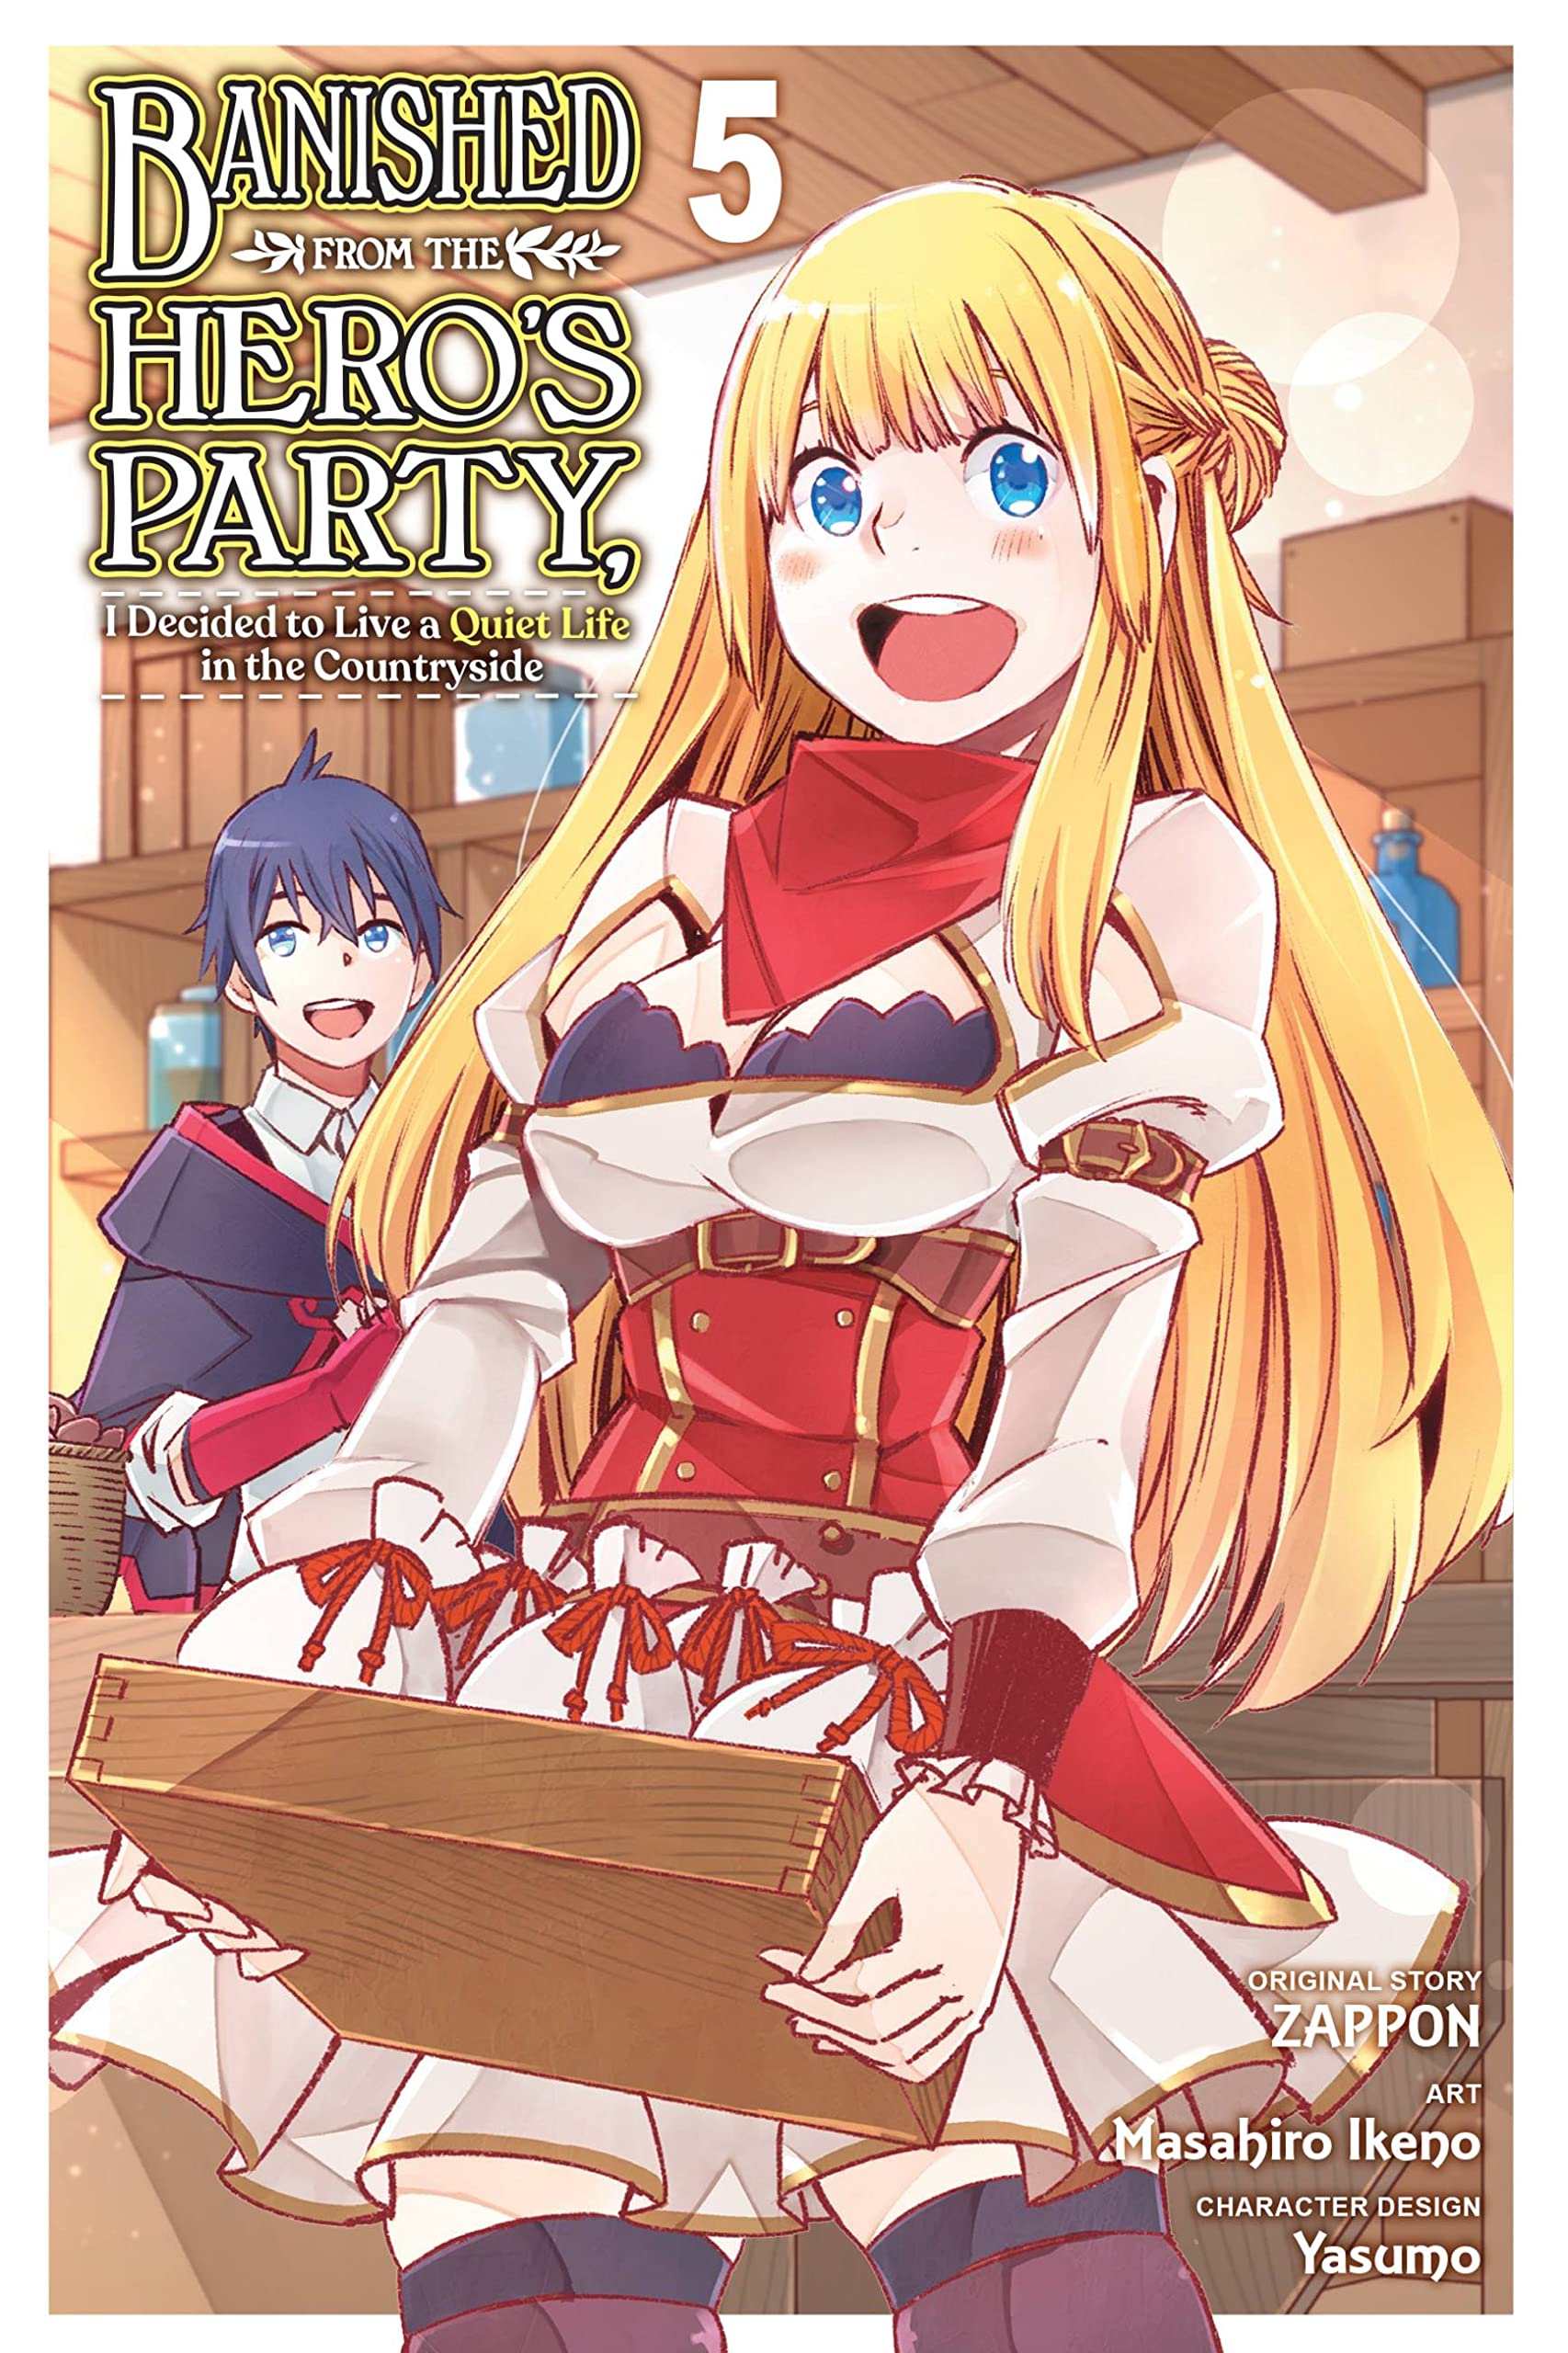 Banished from the Hero's Party, I Decided to Live a Quiet Life in the Countryside (Manga) Vol. 05